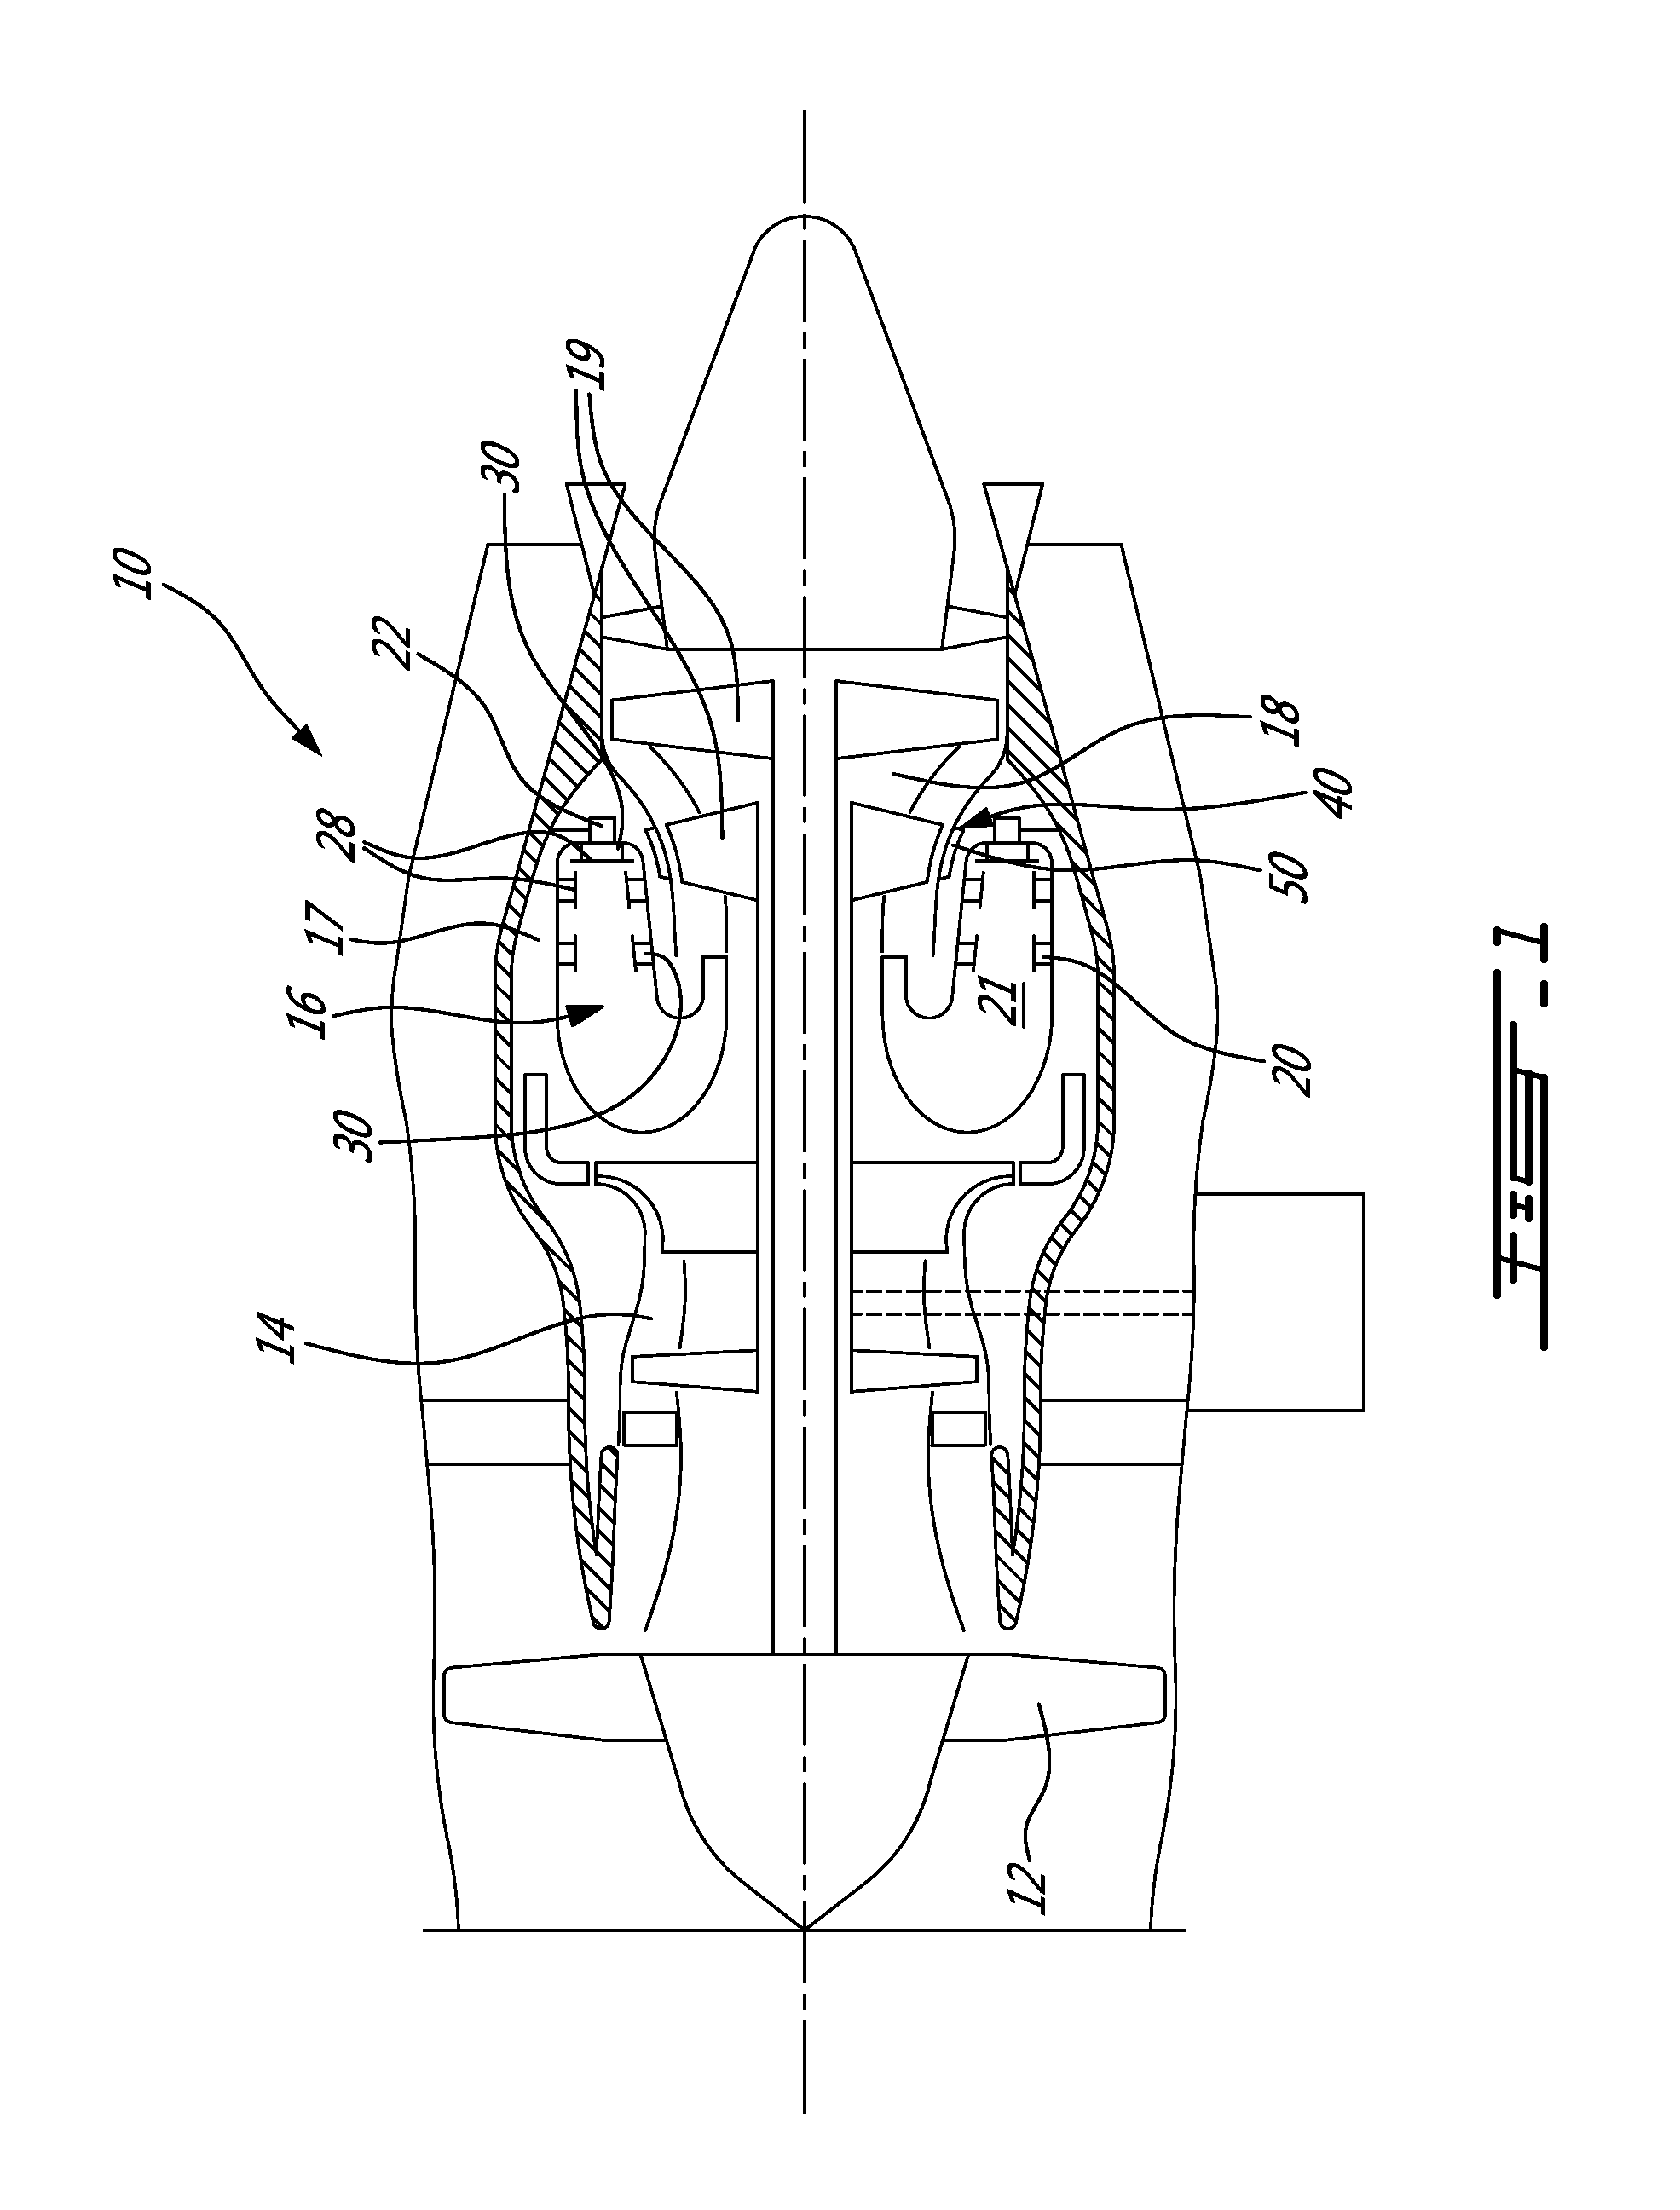 Method of forming a component from a green part